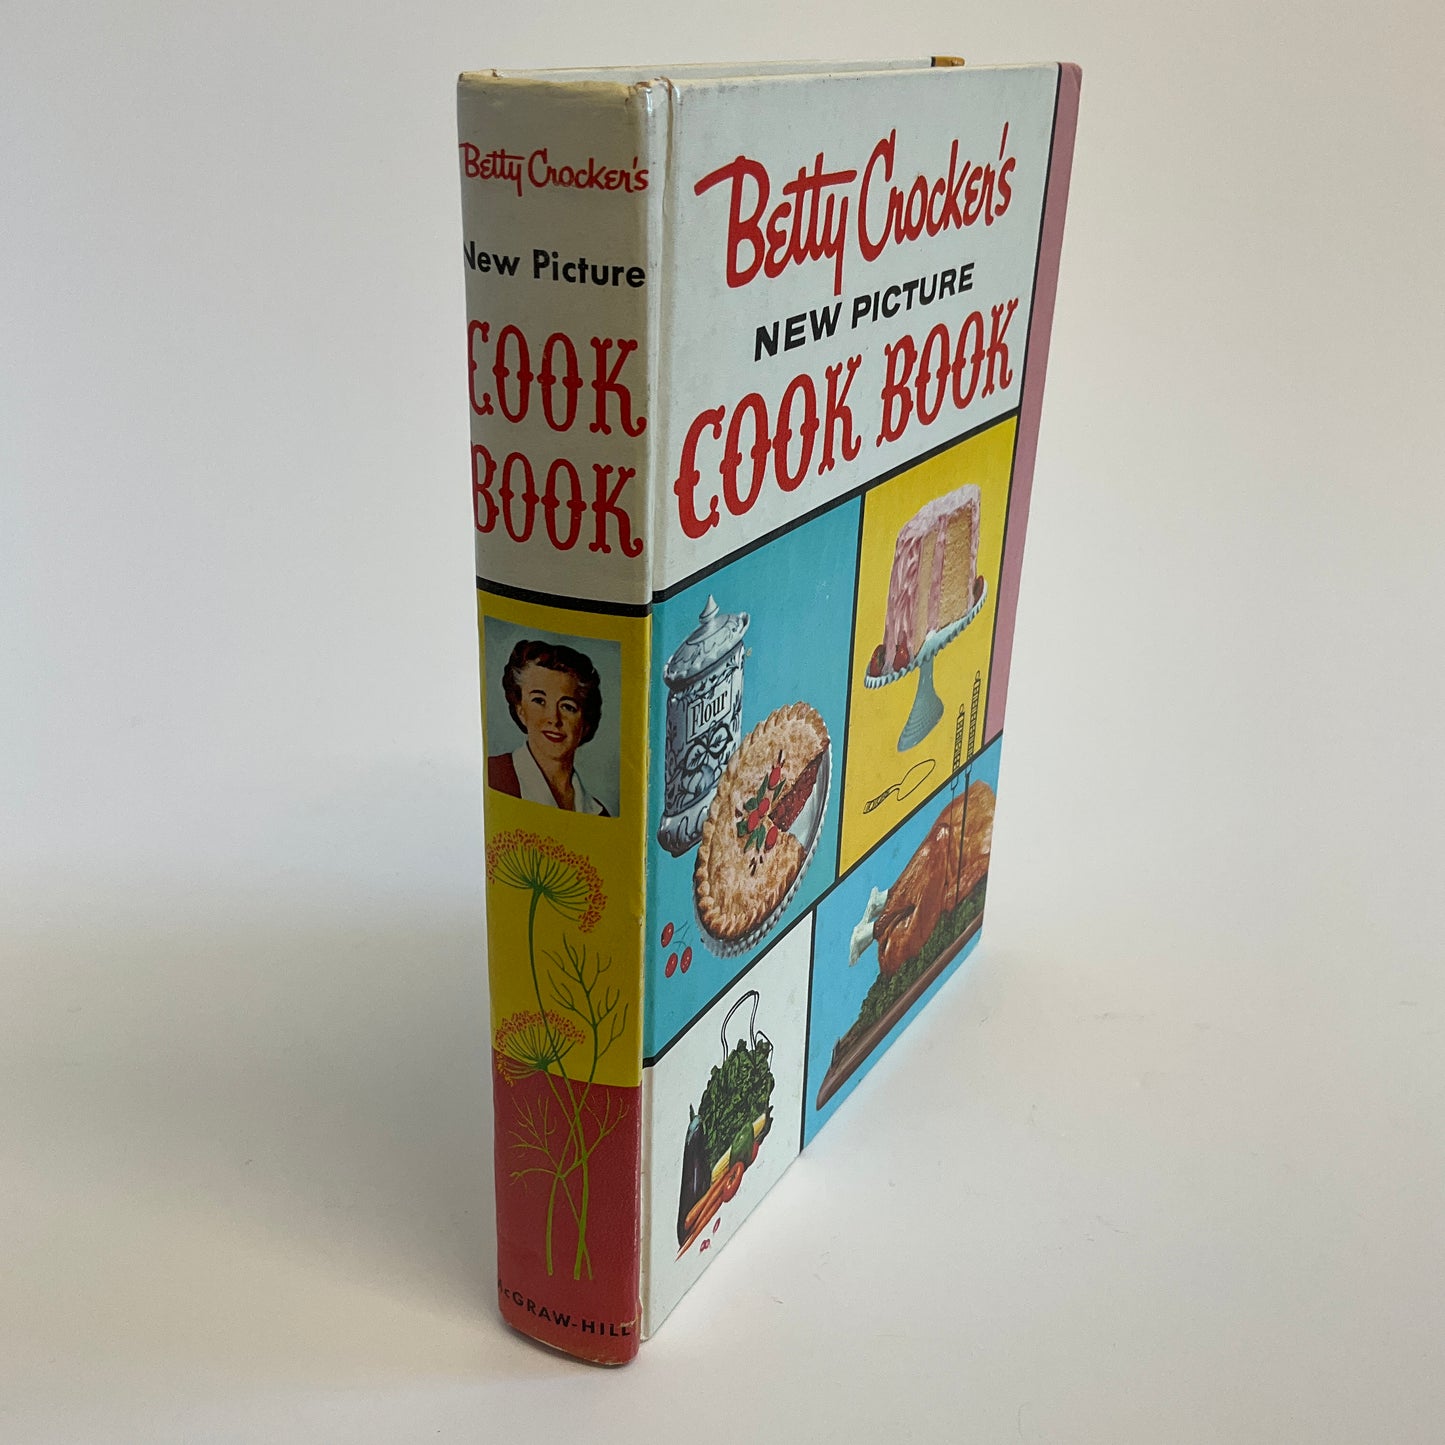 General Mills - Betty Crocker's New Picture Cook Book (First Ed, First Print)